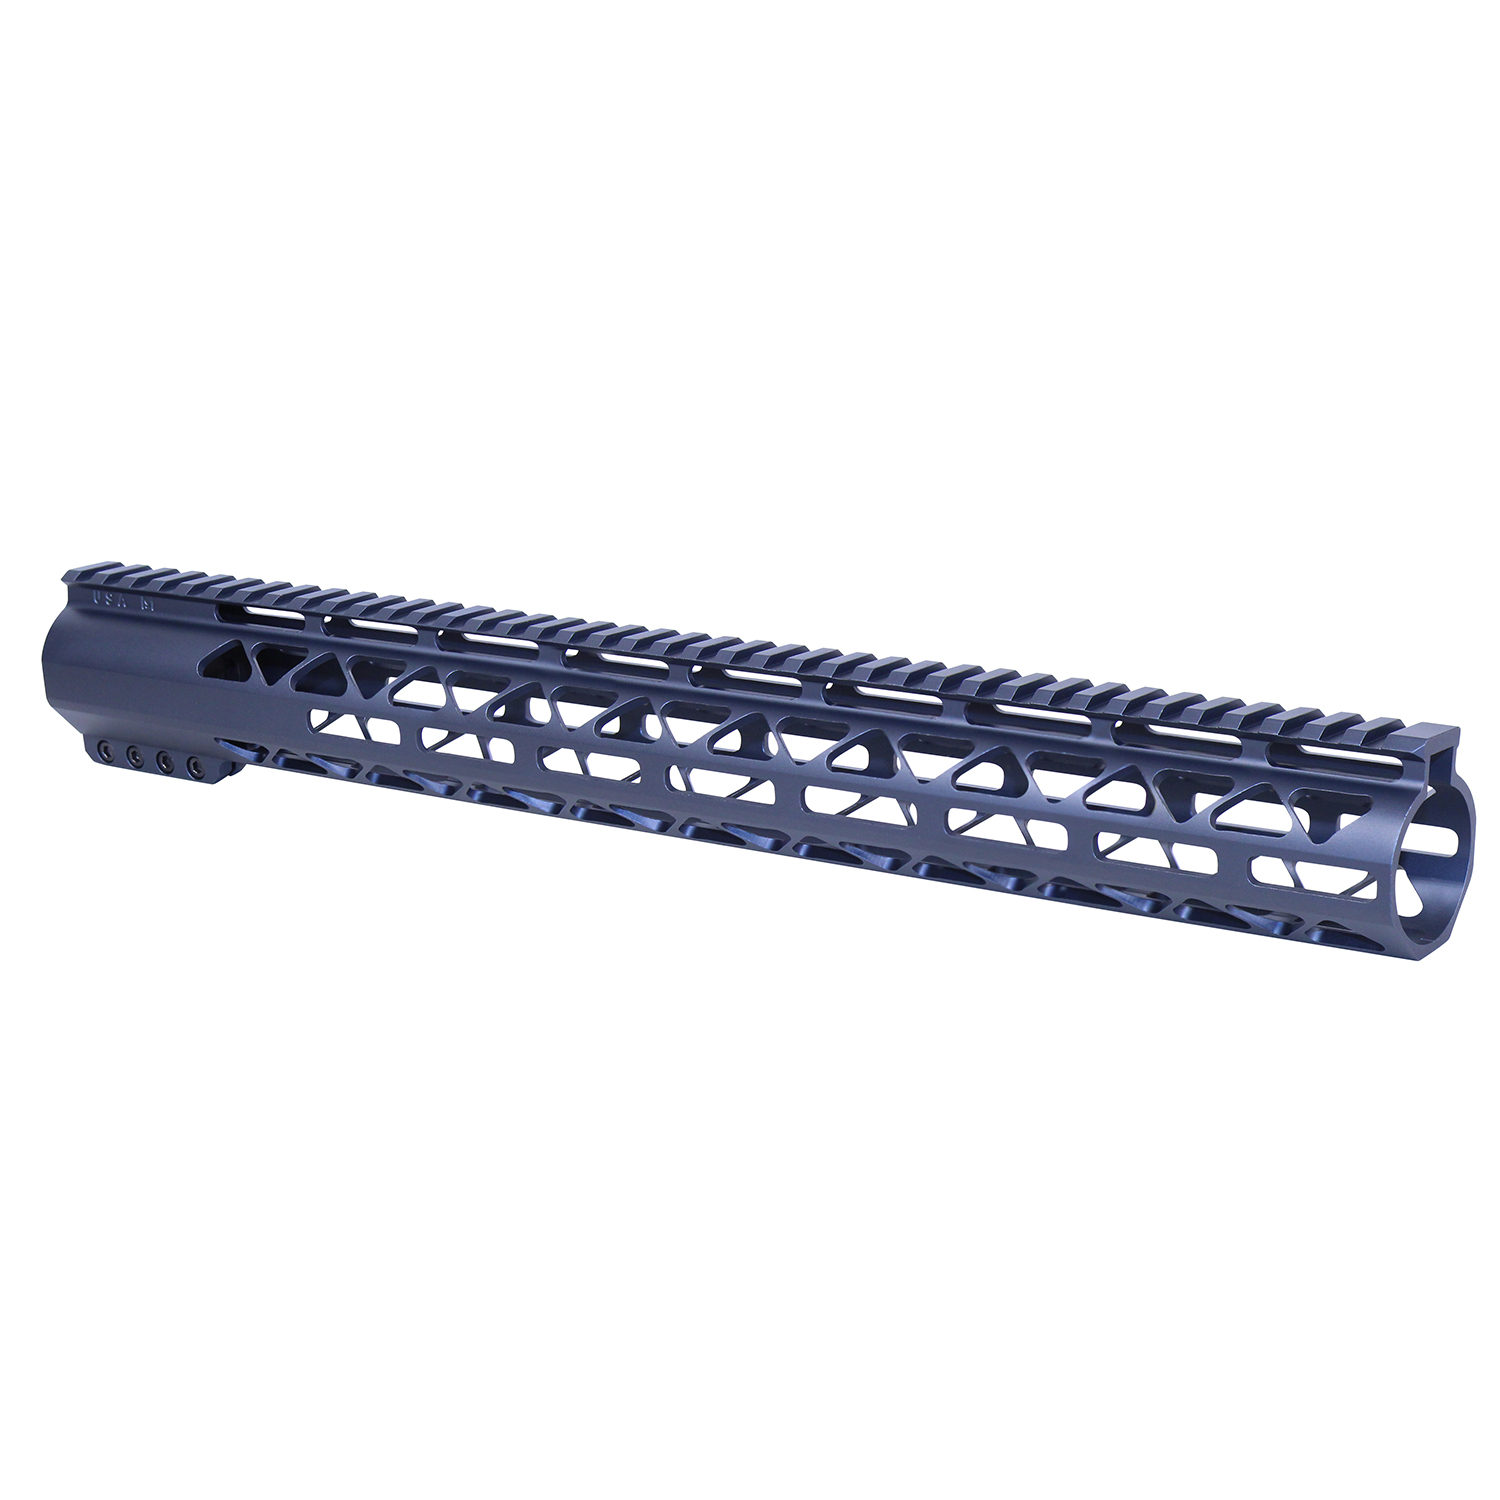 16.5" AIR-LOK Series M-LOK Compression Free Floating Handguard With Monolithic Top Rail (.308 Cal) (Anodized Grey)